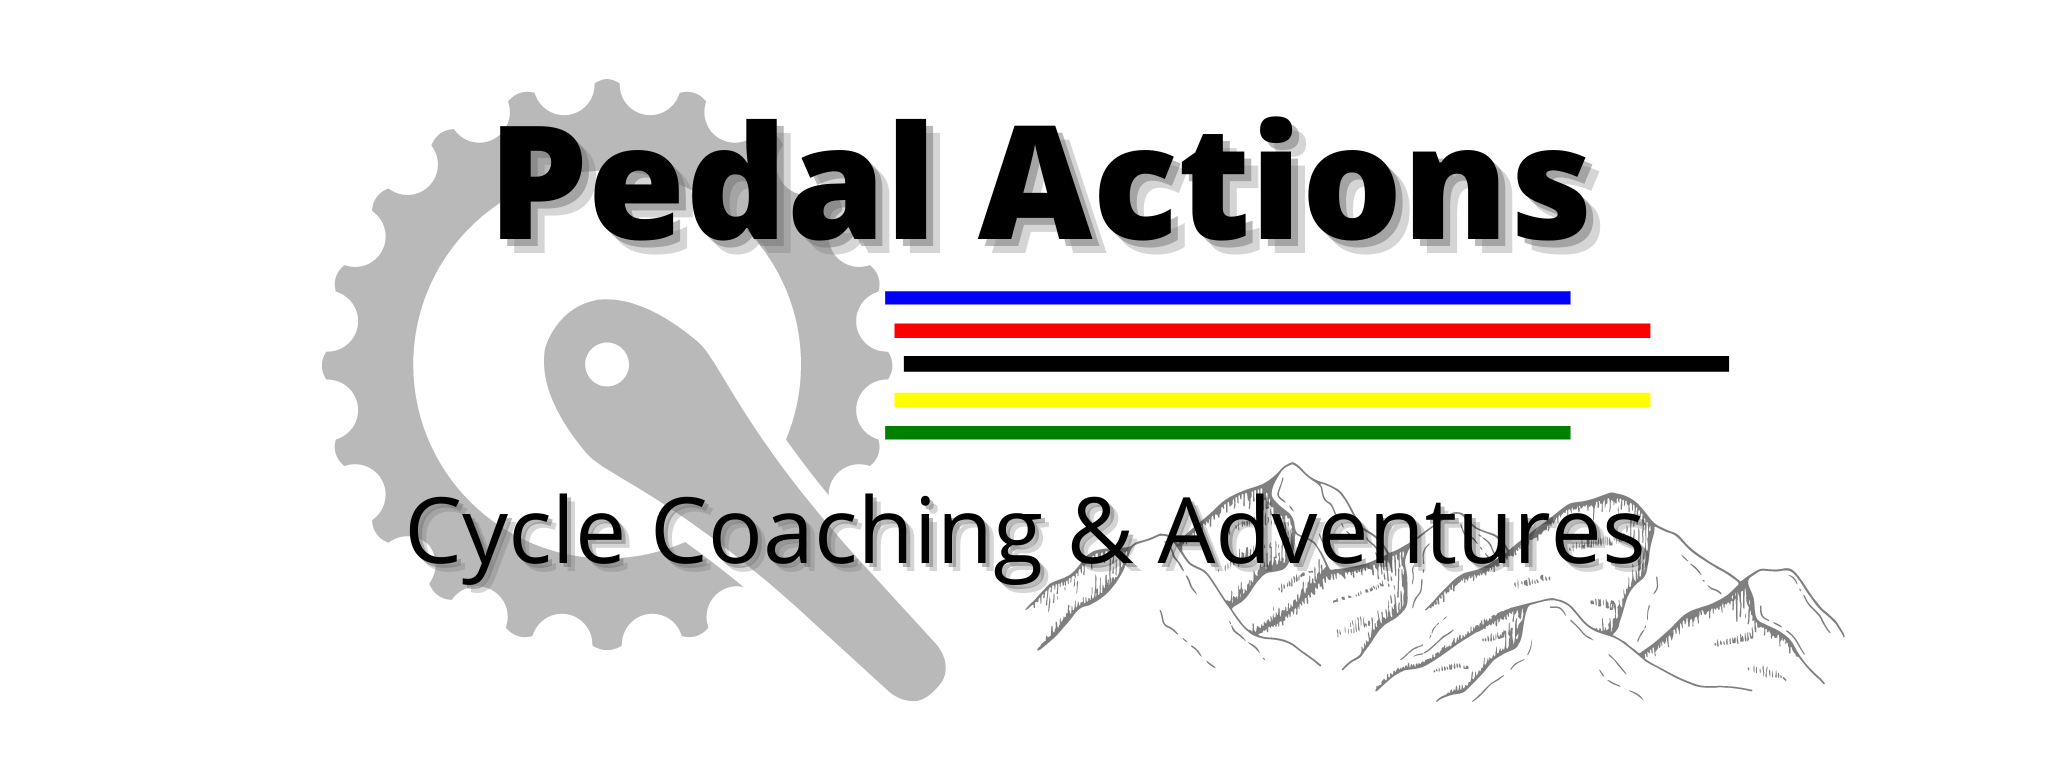 Pedal Actions - Cycle Coaching & Adventures